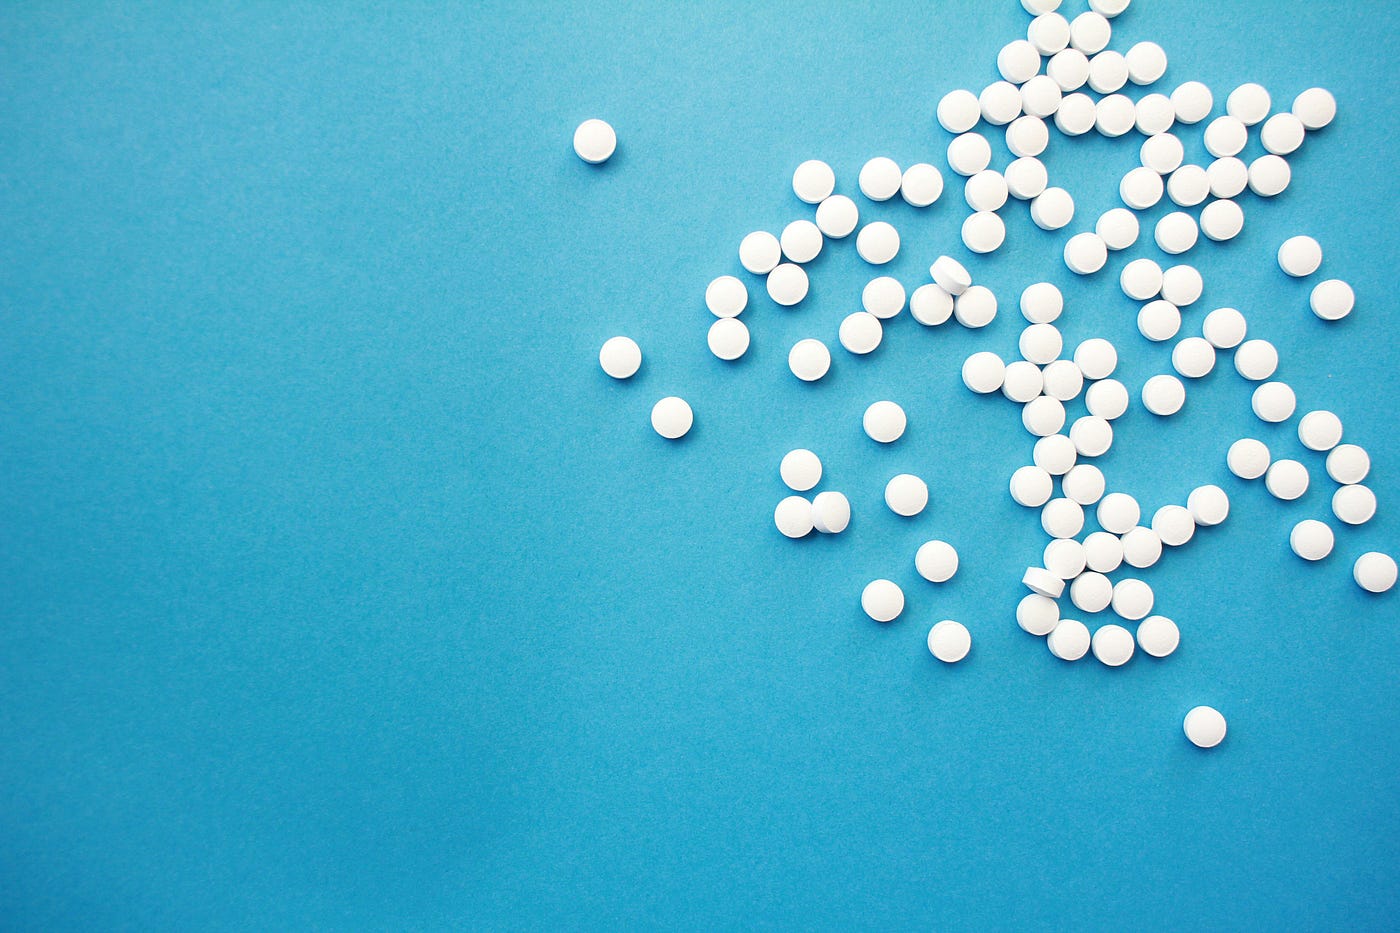 Numerous small white pills, against a powder blue background.